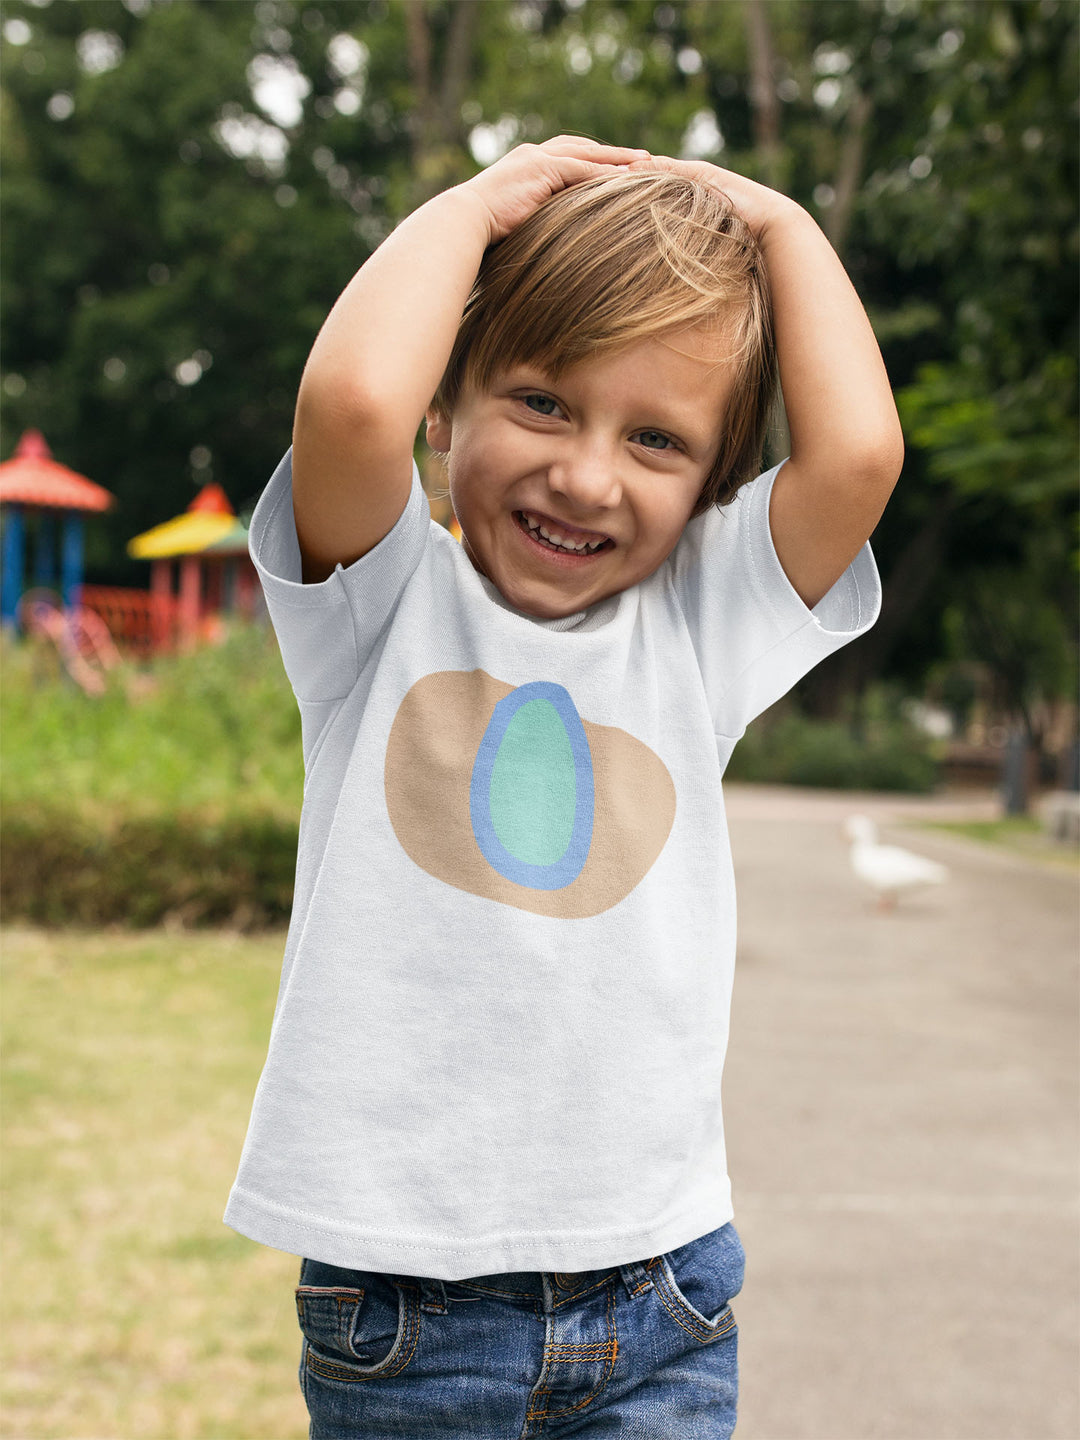 O Letter Alphabet Blue Nude. Short Sleeve T-shirt For Toddler And Kids.